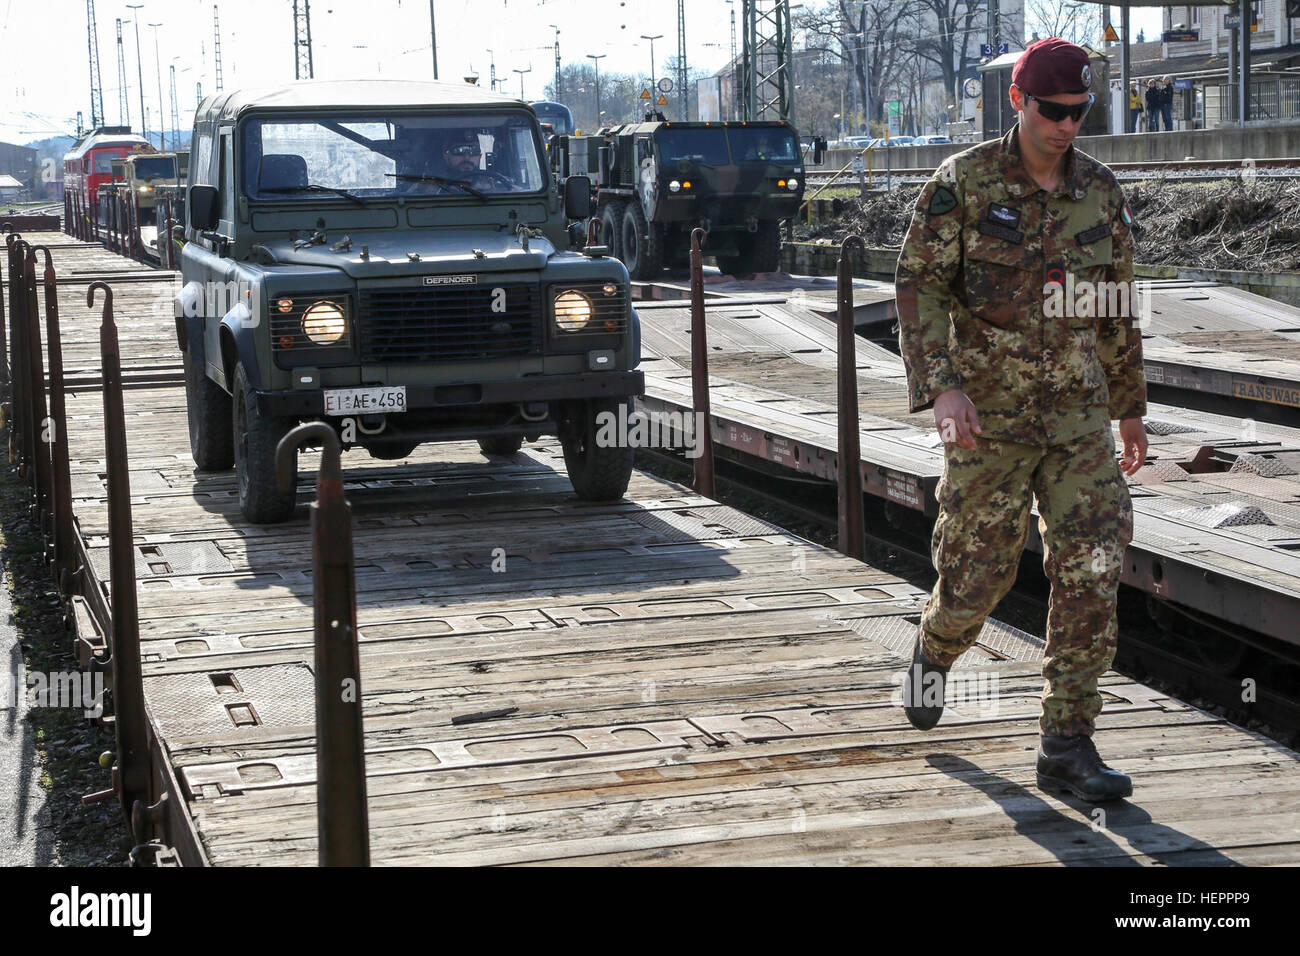 An Italian soldier of Folgore Parachute Brigade ground guides a Land Rover Defender 90 off rail cars in preparation for a convoy during exercise Saber Junction 16 at the U.S. Army’s Joint Multinational Readiness Center (JMRC) in Hohenfels, Germany, April 7, 2016. Saber Junction 16 is the U.S. Army Europe’s 173rd Airborne Brigade’s combat training center certification exercise, taking place at the JMRC in Hohenfels, Germany, Mar. 31-Apr. 24, 2016.  The exercise is designed to evaluate the readiness of the Army’s Europe-based combat brigades to conduct unified land operations and promote interop Stock Photo